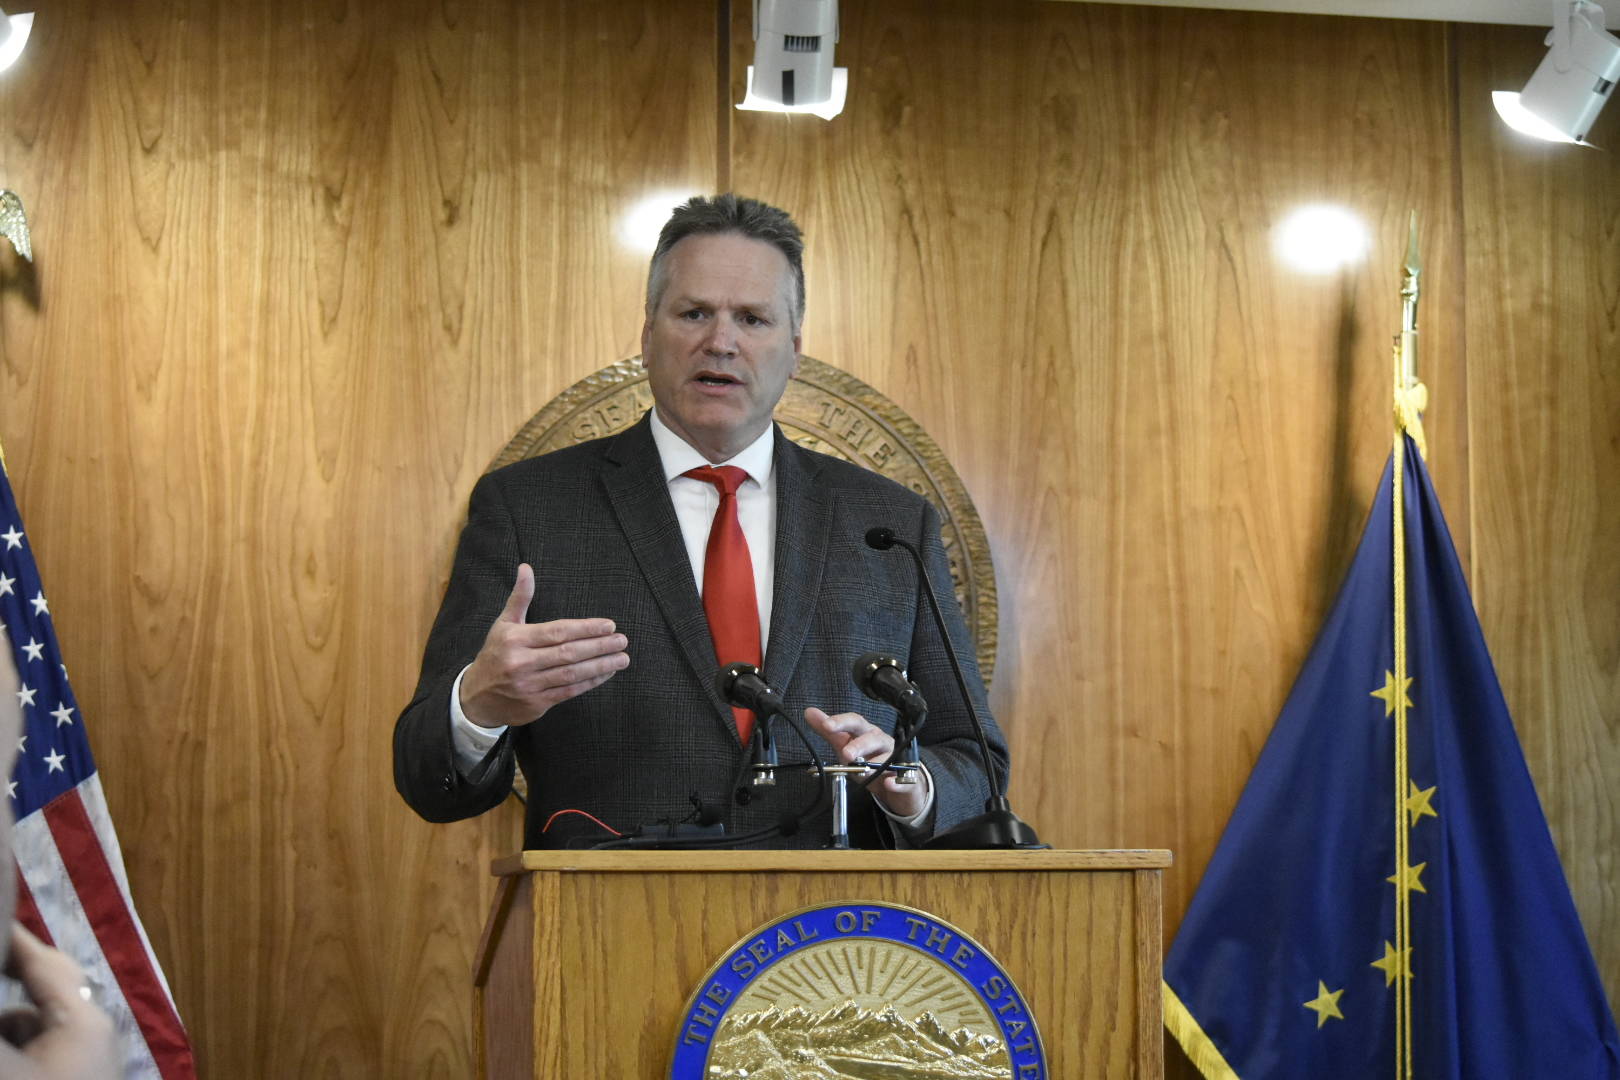 Gov. Mike Dunleavy held a press conference at the Alaska State Capitol on Thursday, June 17, 2021, to say he was ready to call lawmakers into yet another special session if they didn’t rectify issues with the budget passed earlier this week by Friday. (Peter Segall / Juneau Empire)